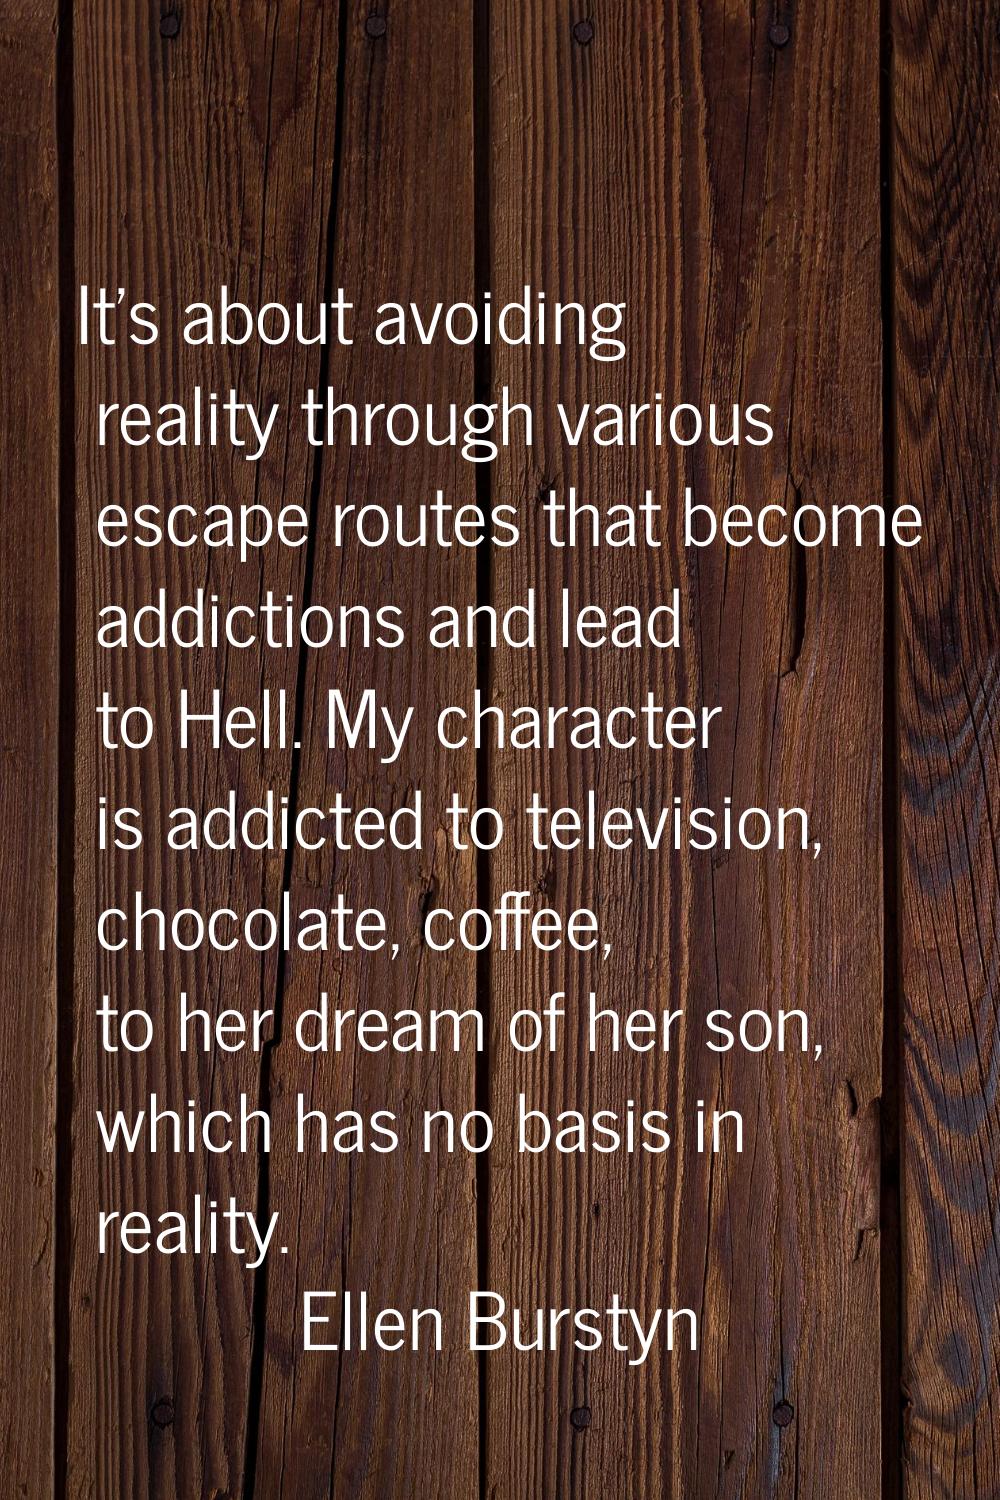 It's about avoiding reality through various escape routes that become addictions and lead to Hell. 